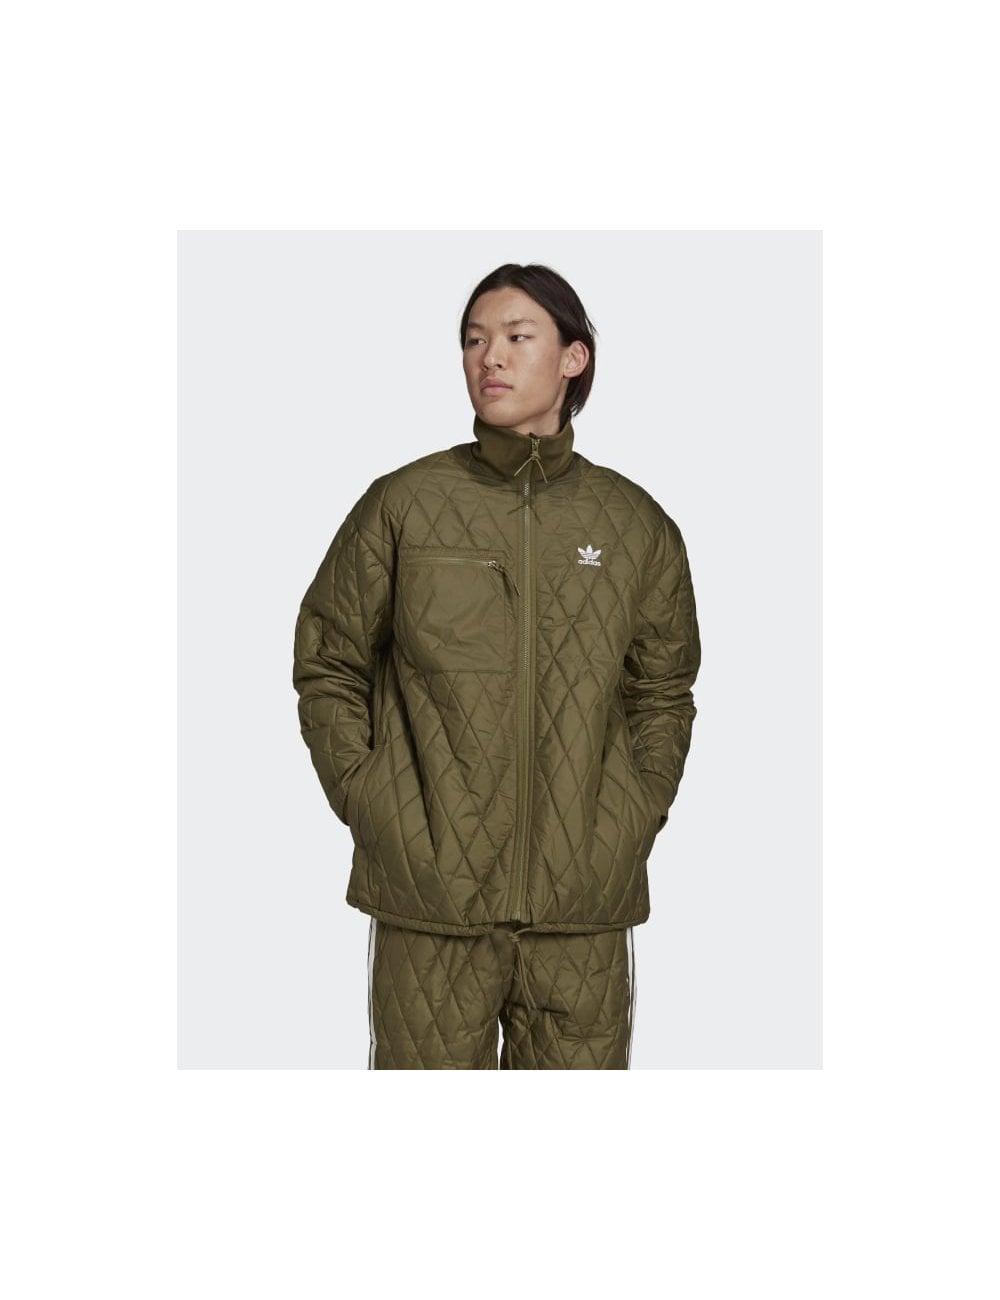 adidas Originals Adicolor Classics Quilted Archive Jacket - Focus Olive in  Green for Men - Save 11% | Lyst